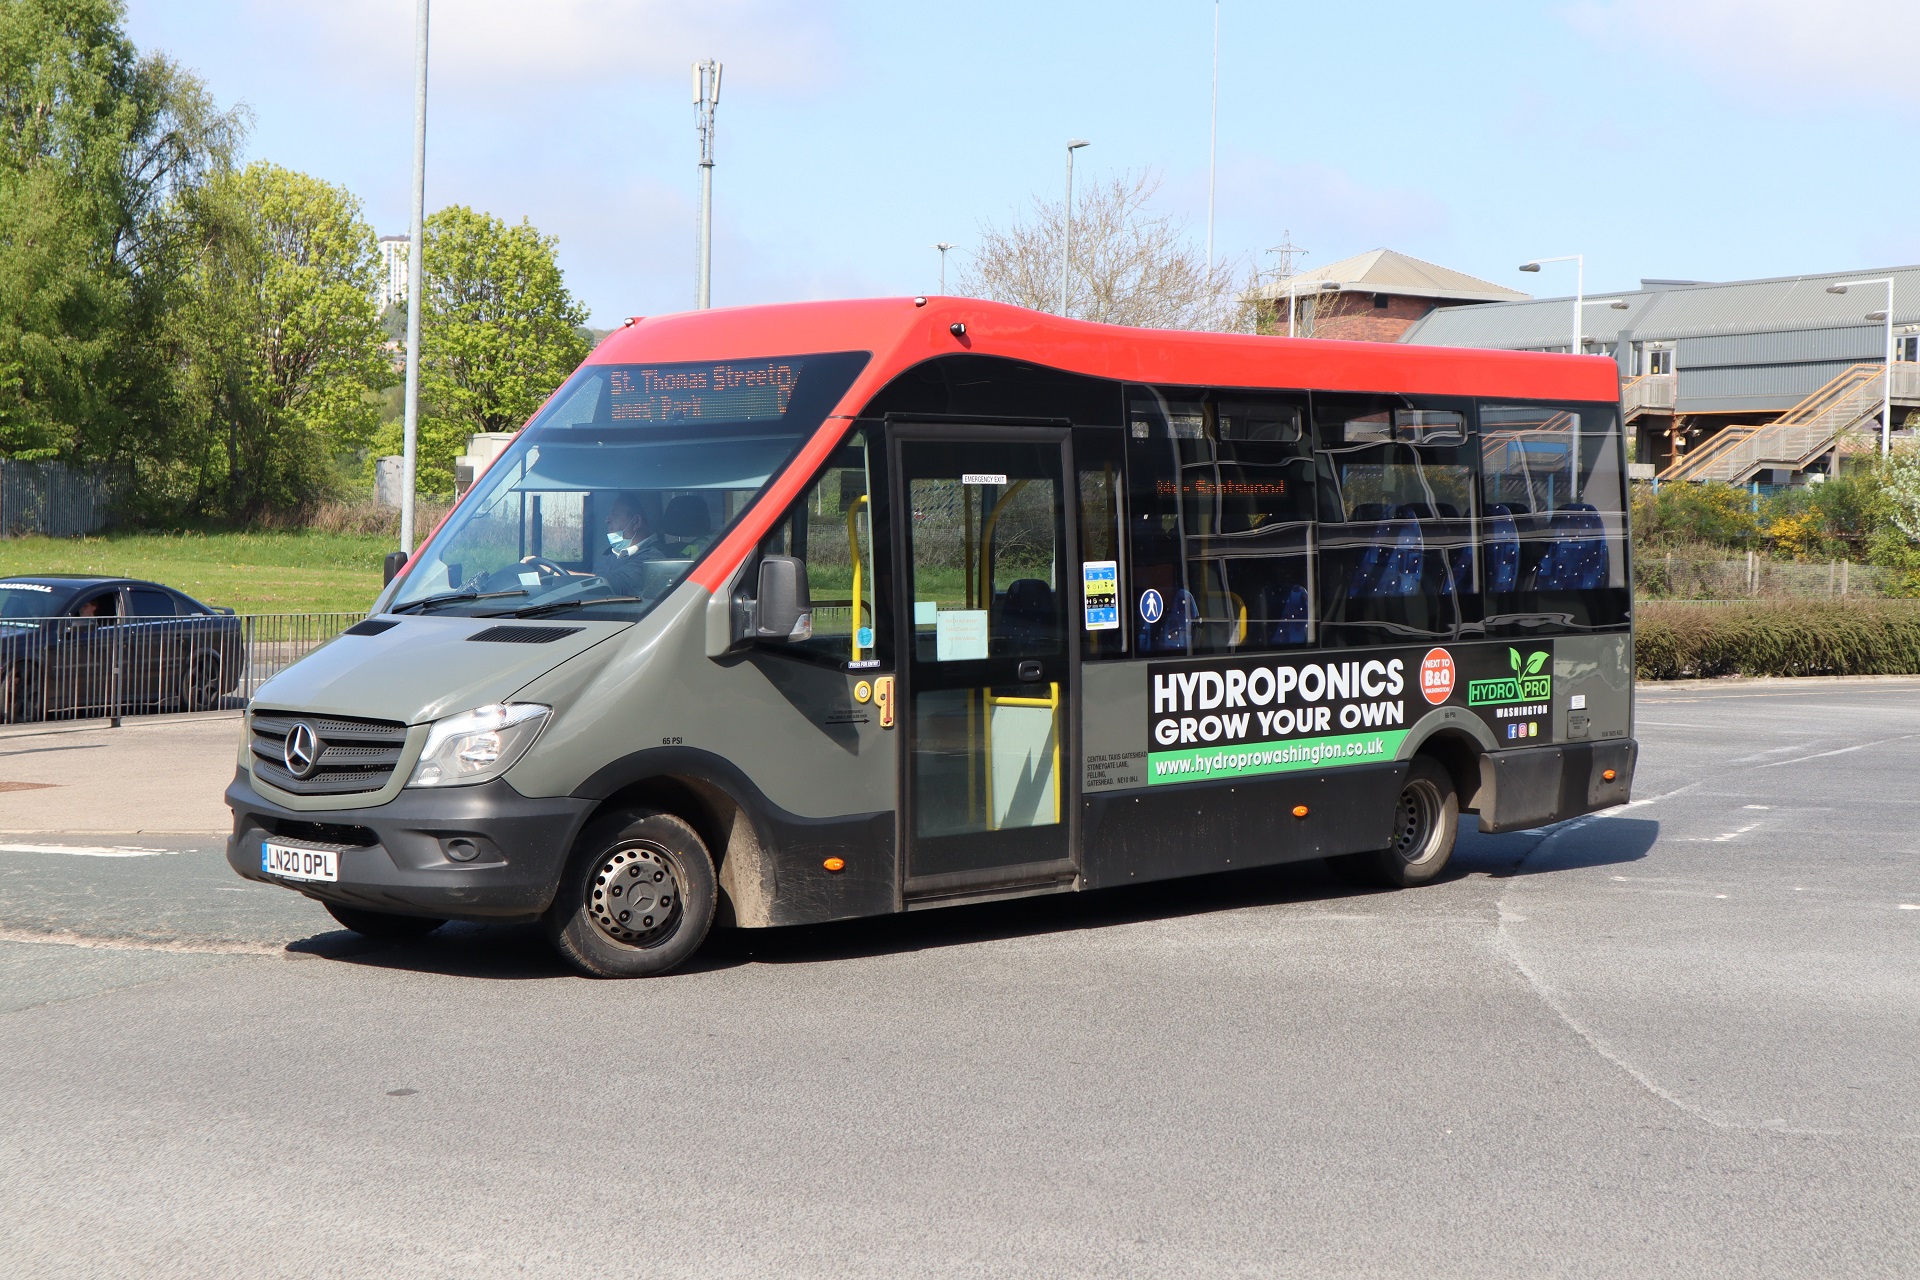 Bus revenue support news is needed soon, says UTG